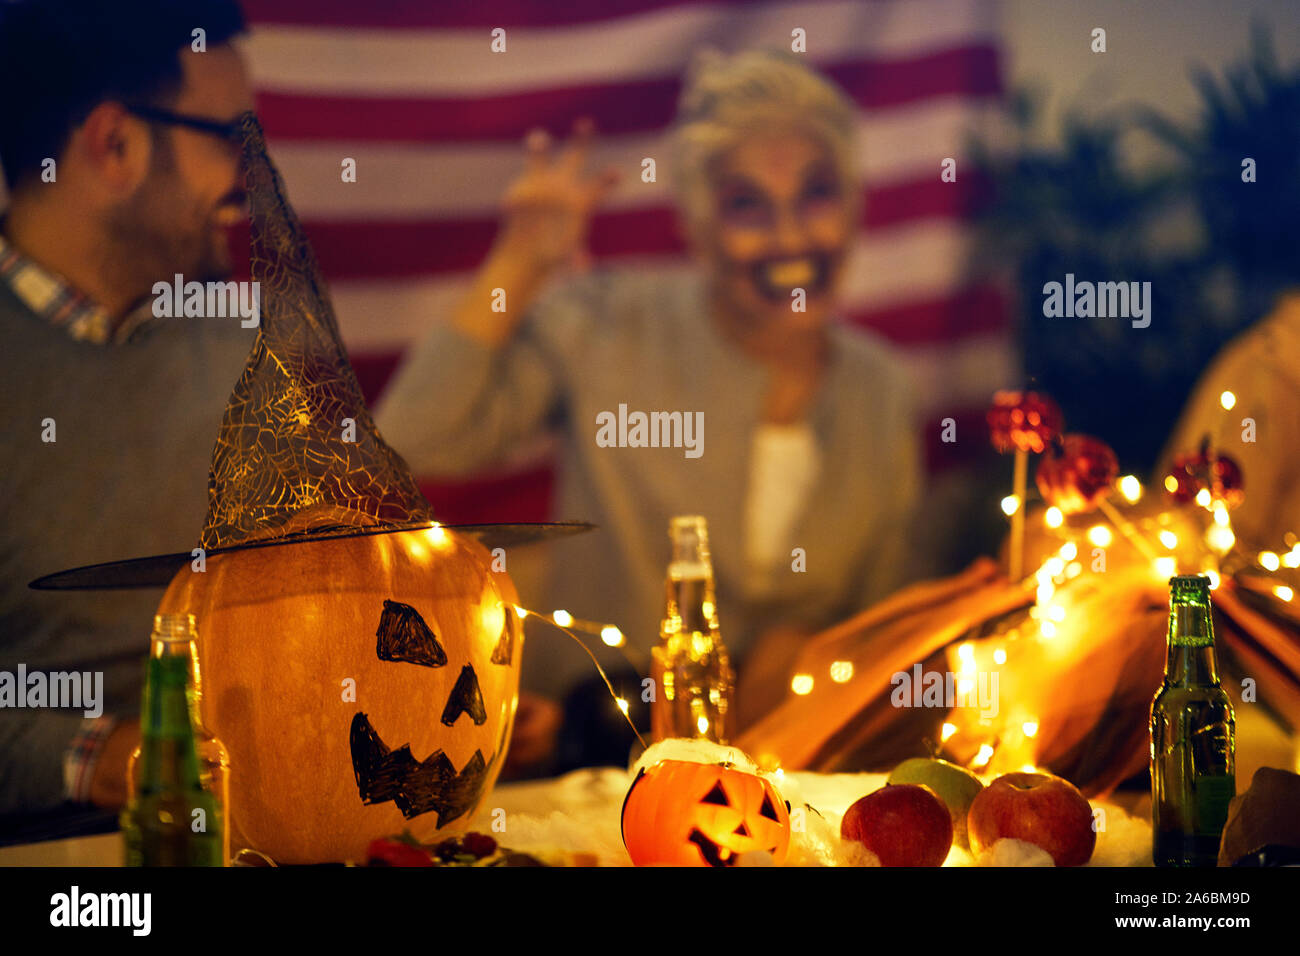 Halloween decorations -  pumpkin and String Lights On Table Stock Photo